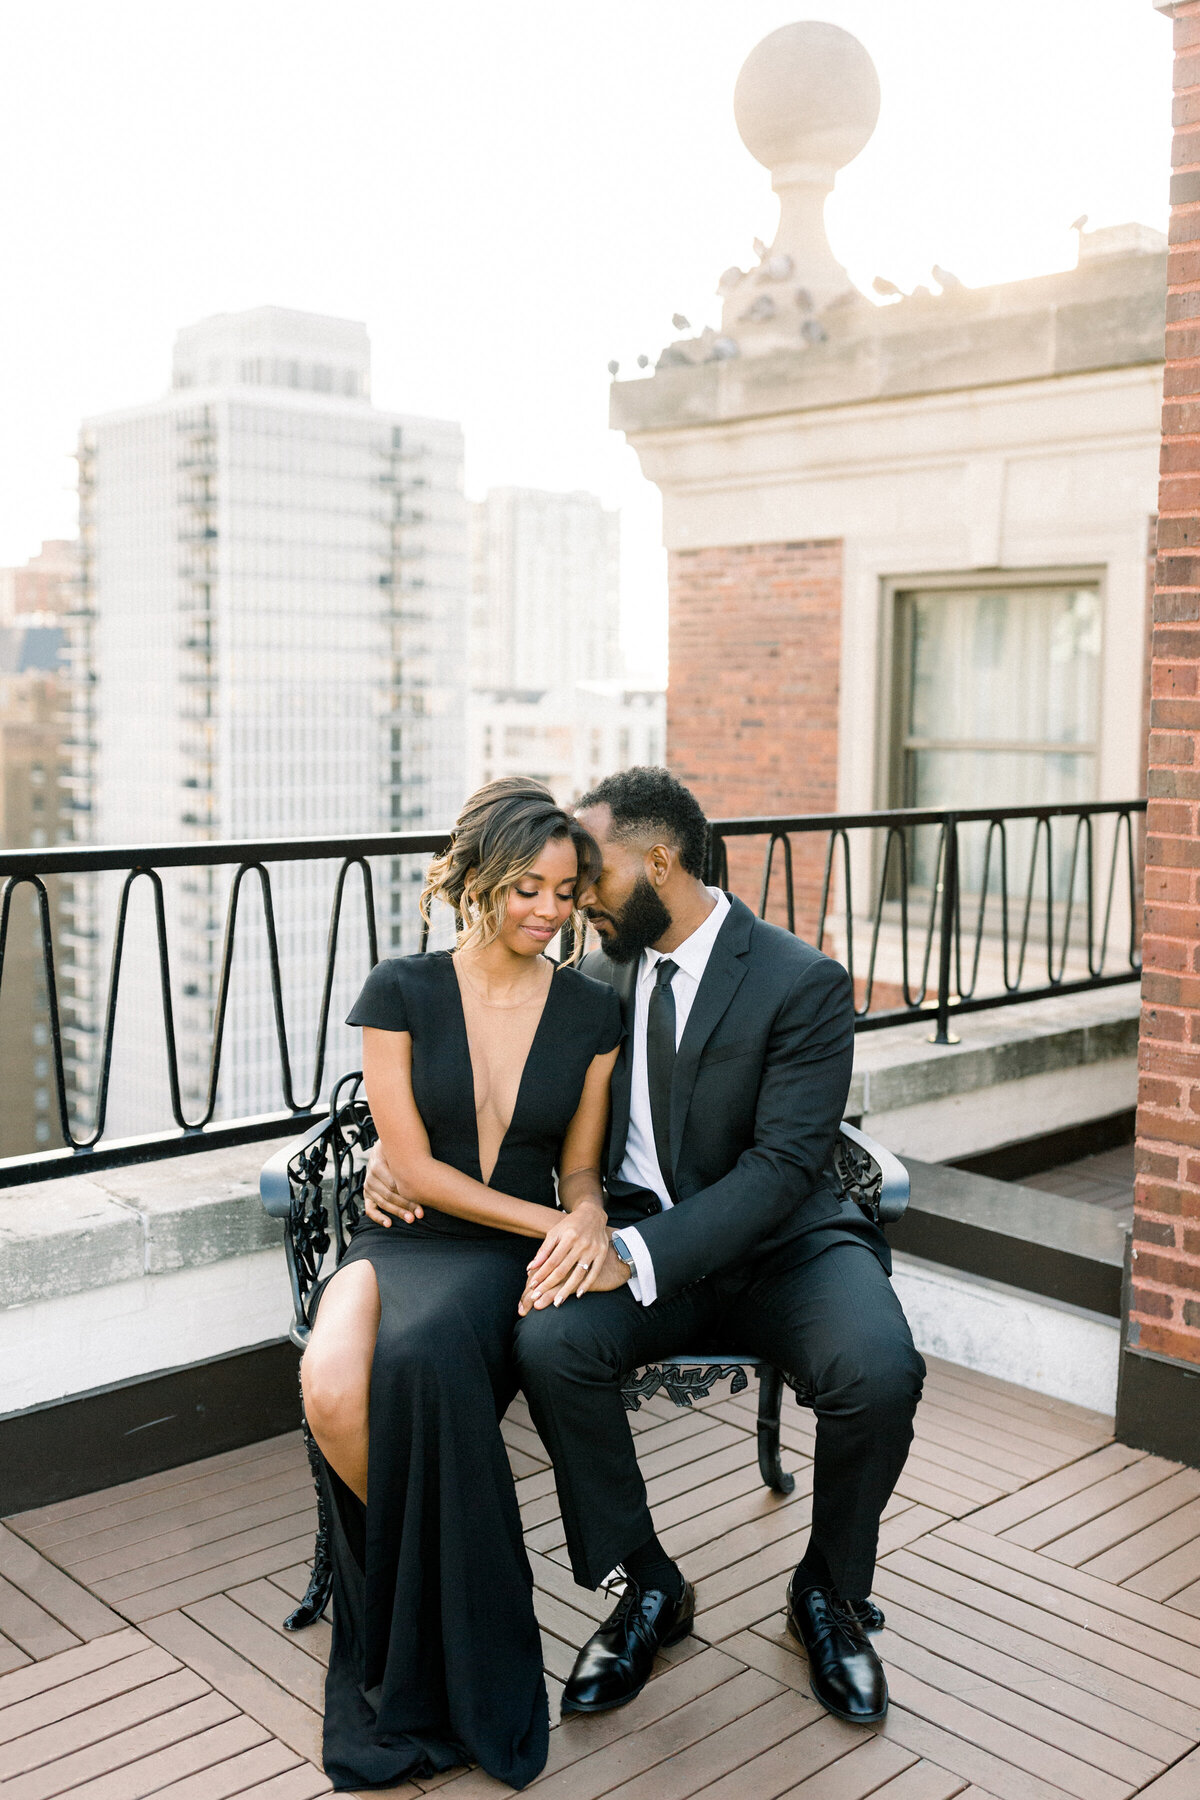 Aisle Society Minted Glam Engagement Session Lisa Hufford (34)